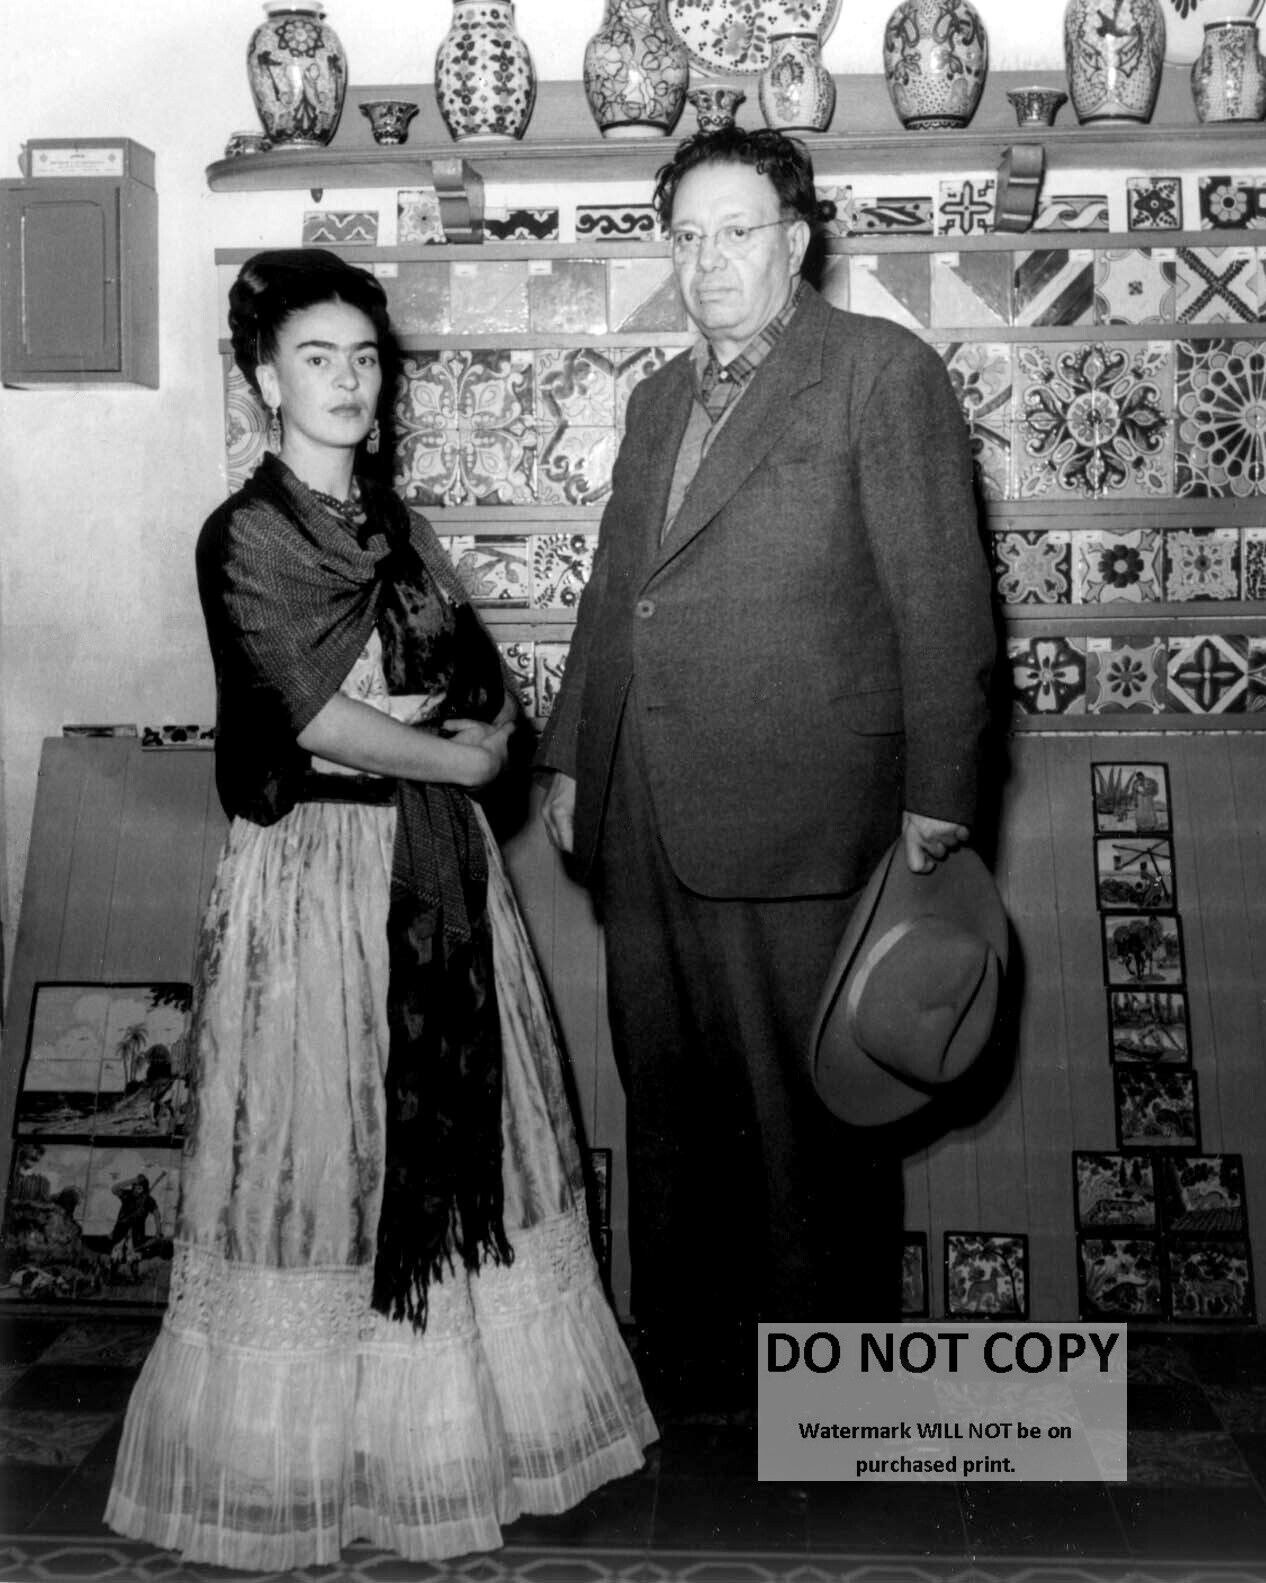 FRIDA KAHLO WITH HUSBAND DIEGO RIVERA MEXICAN PAINTERS - 8X10 PHOTO (FB-492)